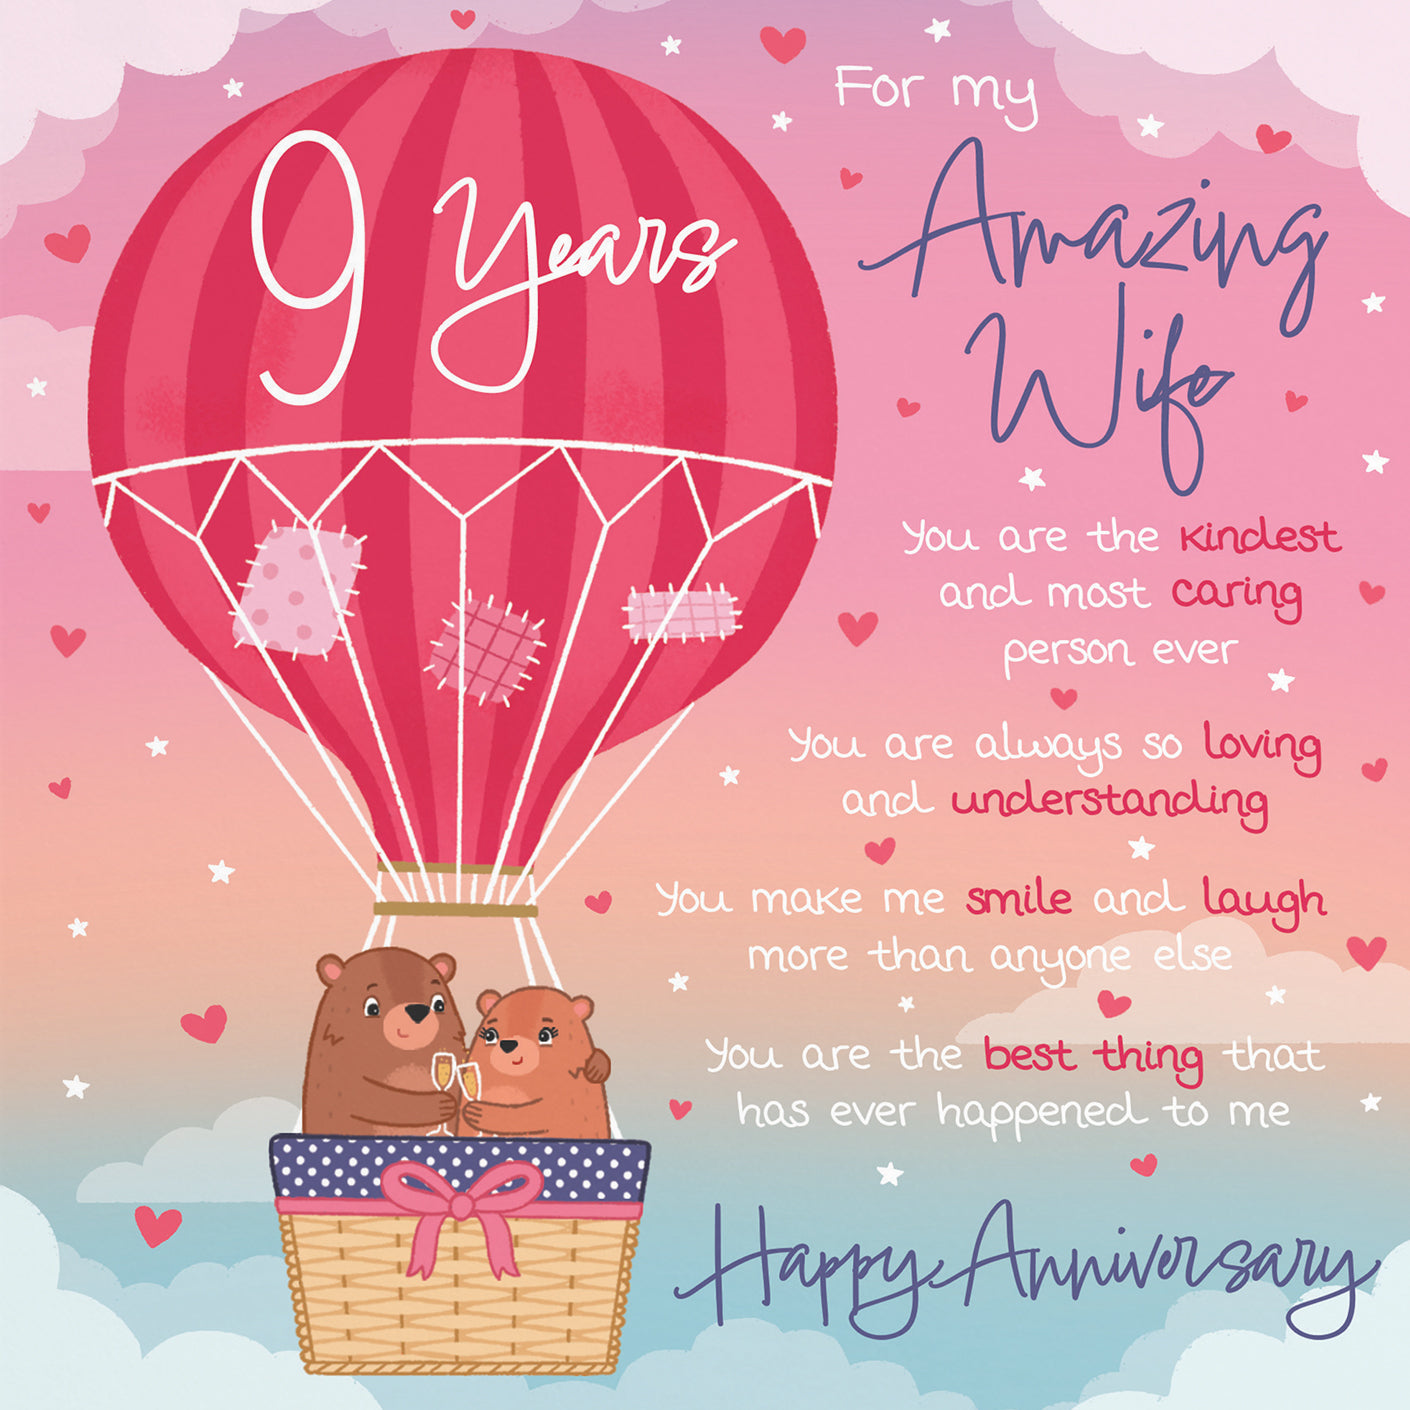 Wife 9th Anniversary Poem Card Love Is In The Air Cute Bears